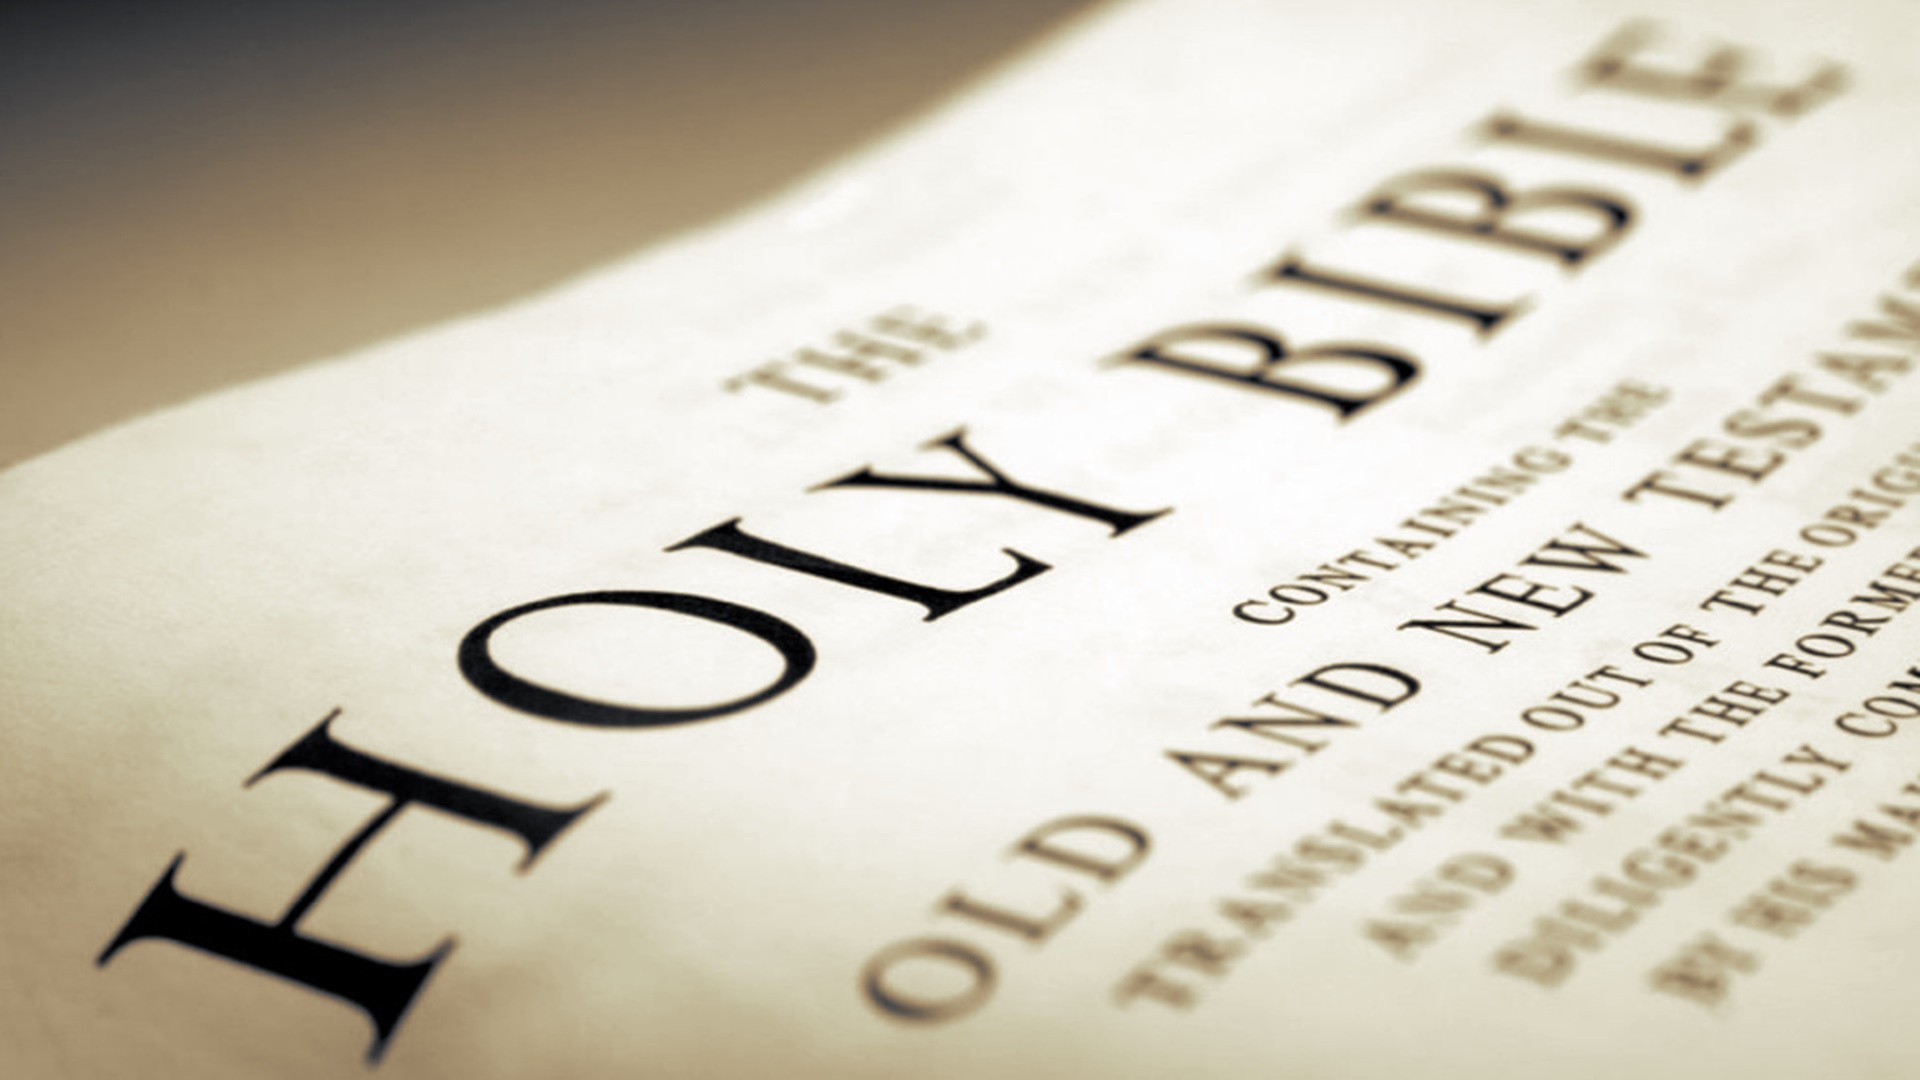 Holy Bible Paper Christianity Text 1920x1080